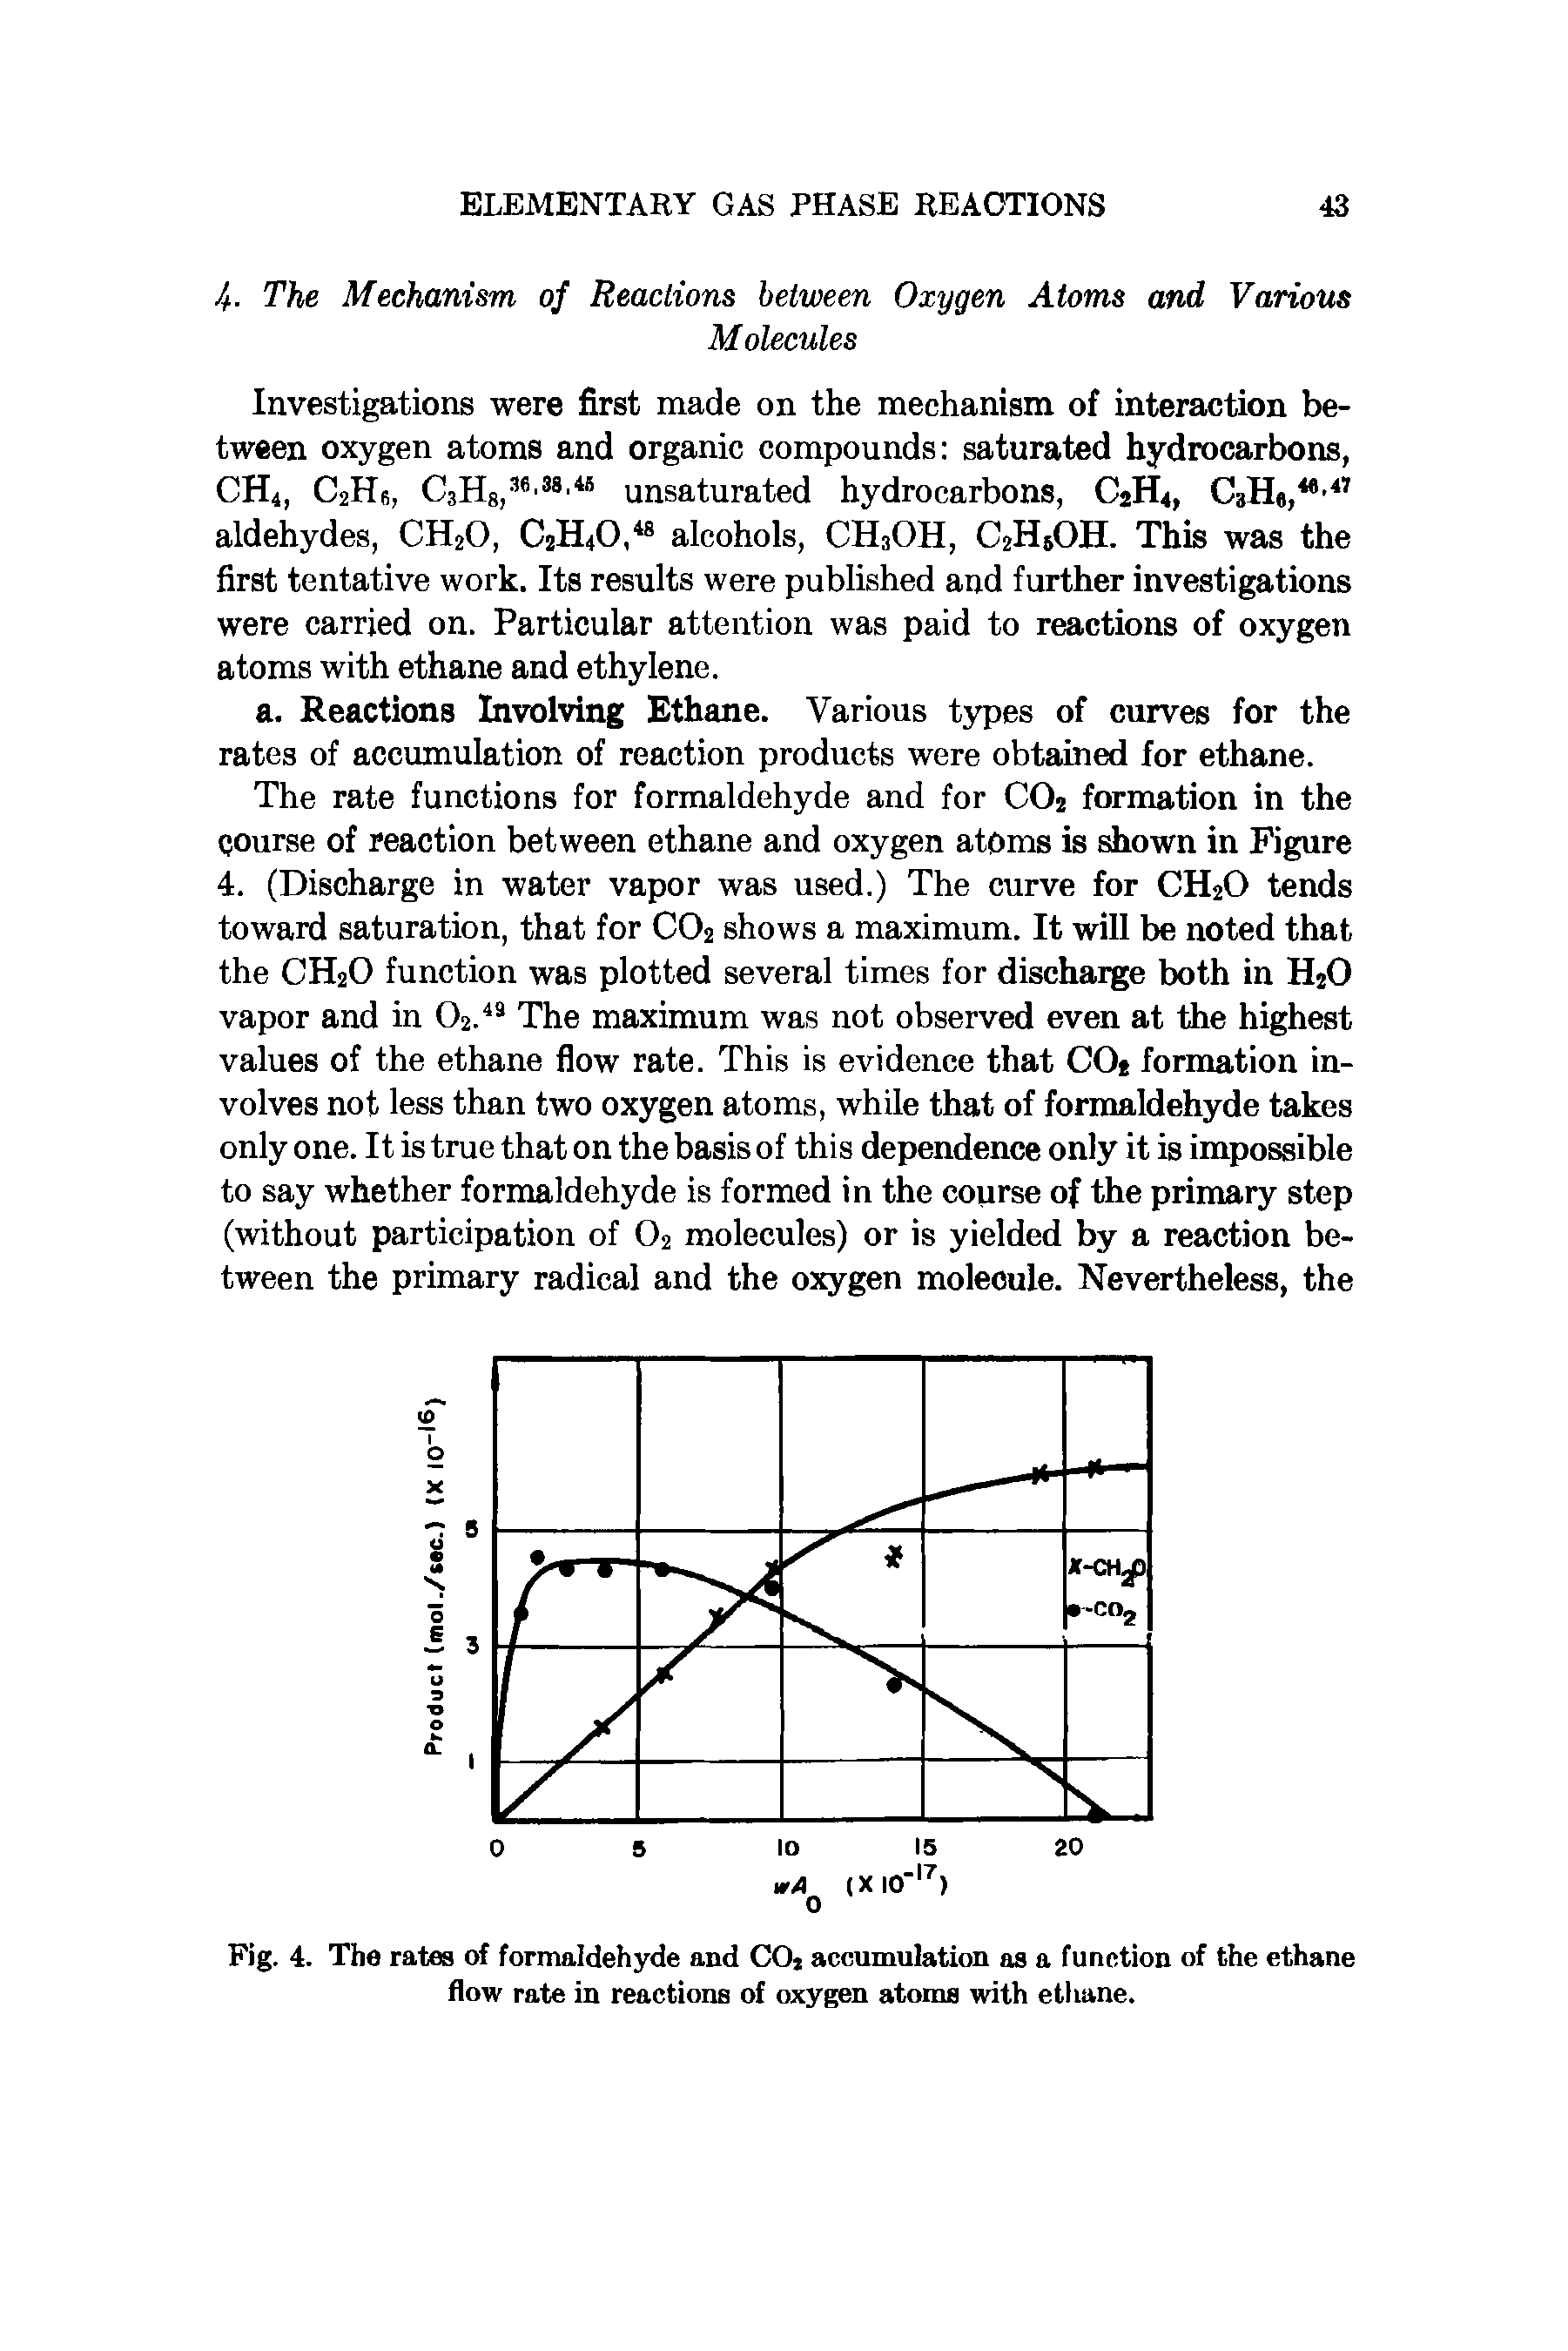 Fig. 4. The rates of formaldehyde and COt accumulation as a function of the ethane flow rate in reactions of oxygen atoms with etiiane.